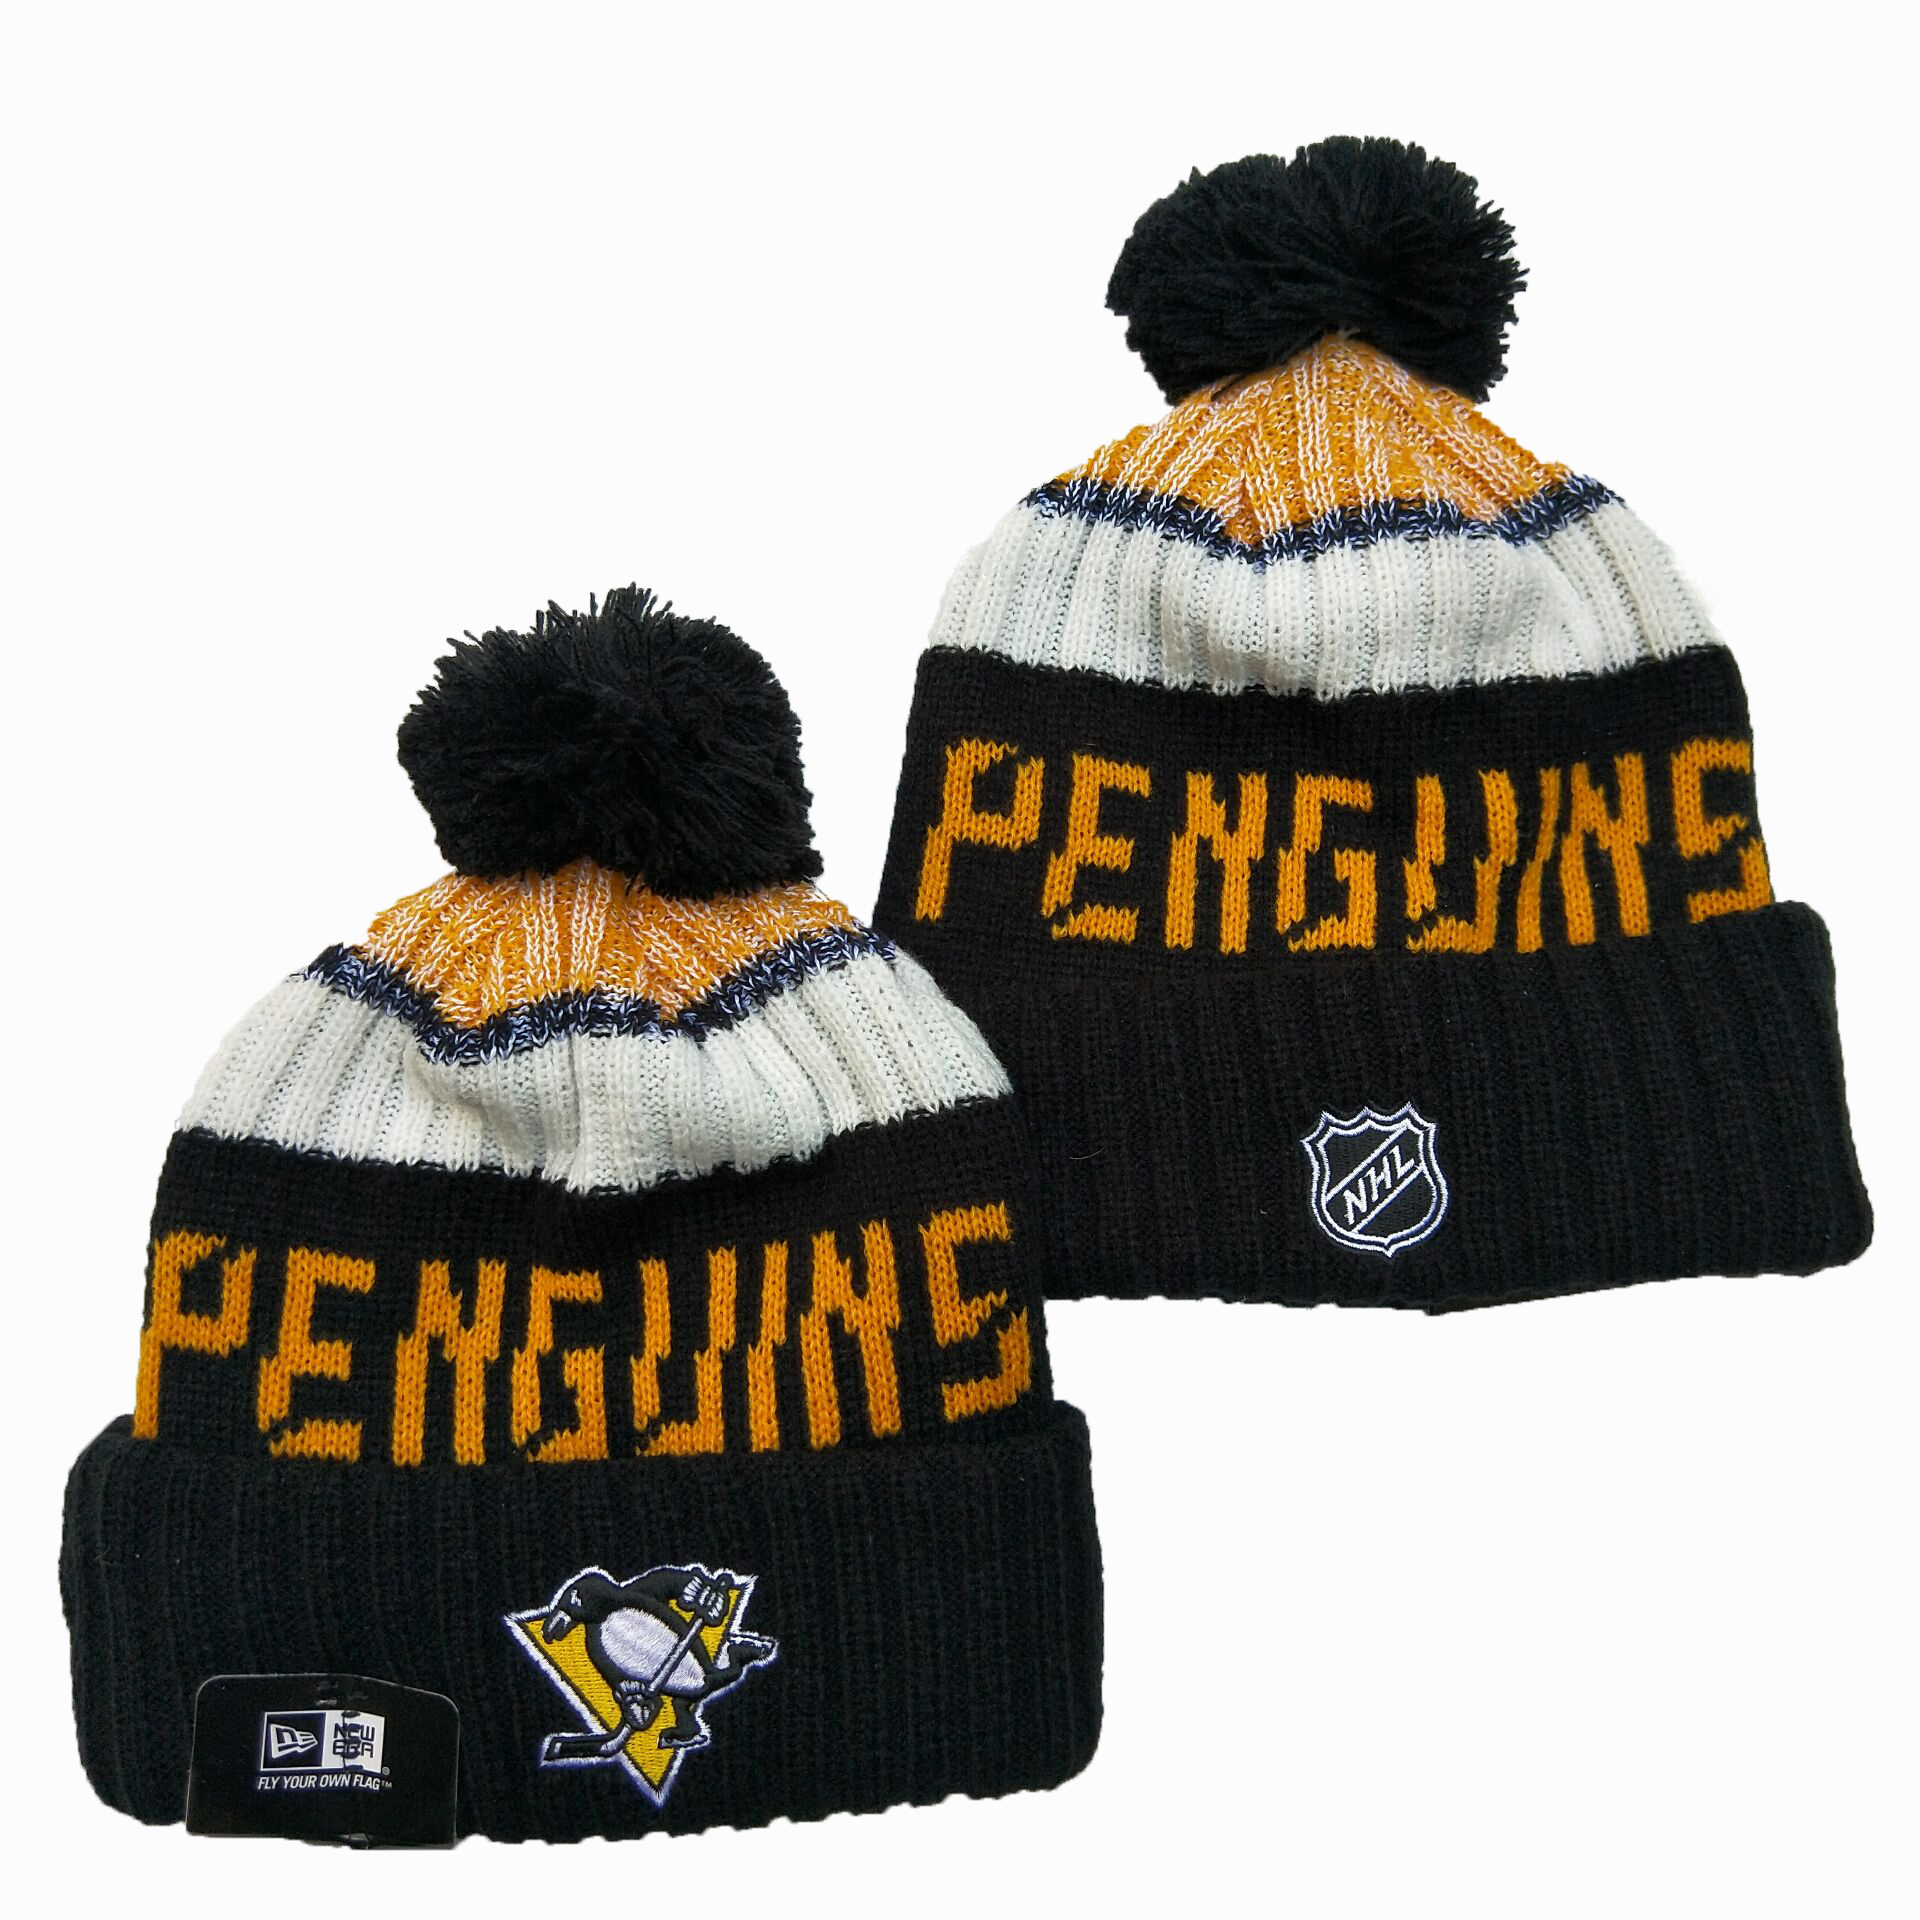 NHL Pittsburgh Penguins Beanies Knit Hats-YD1588